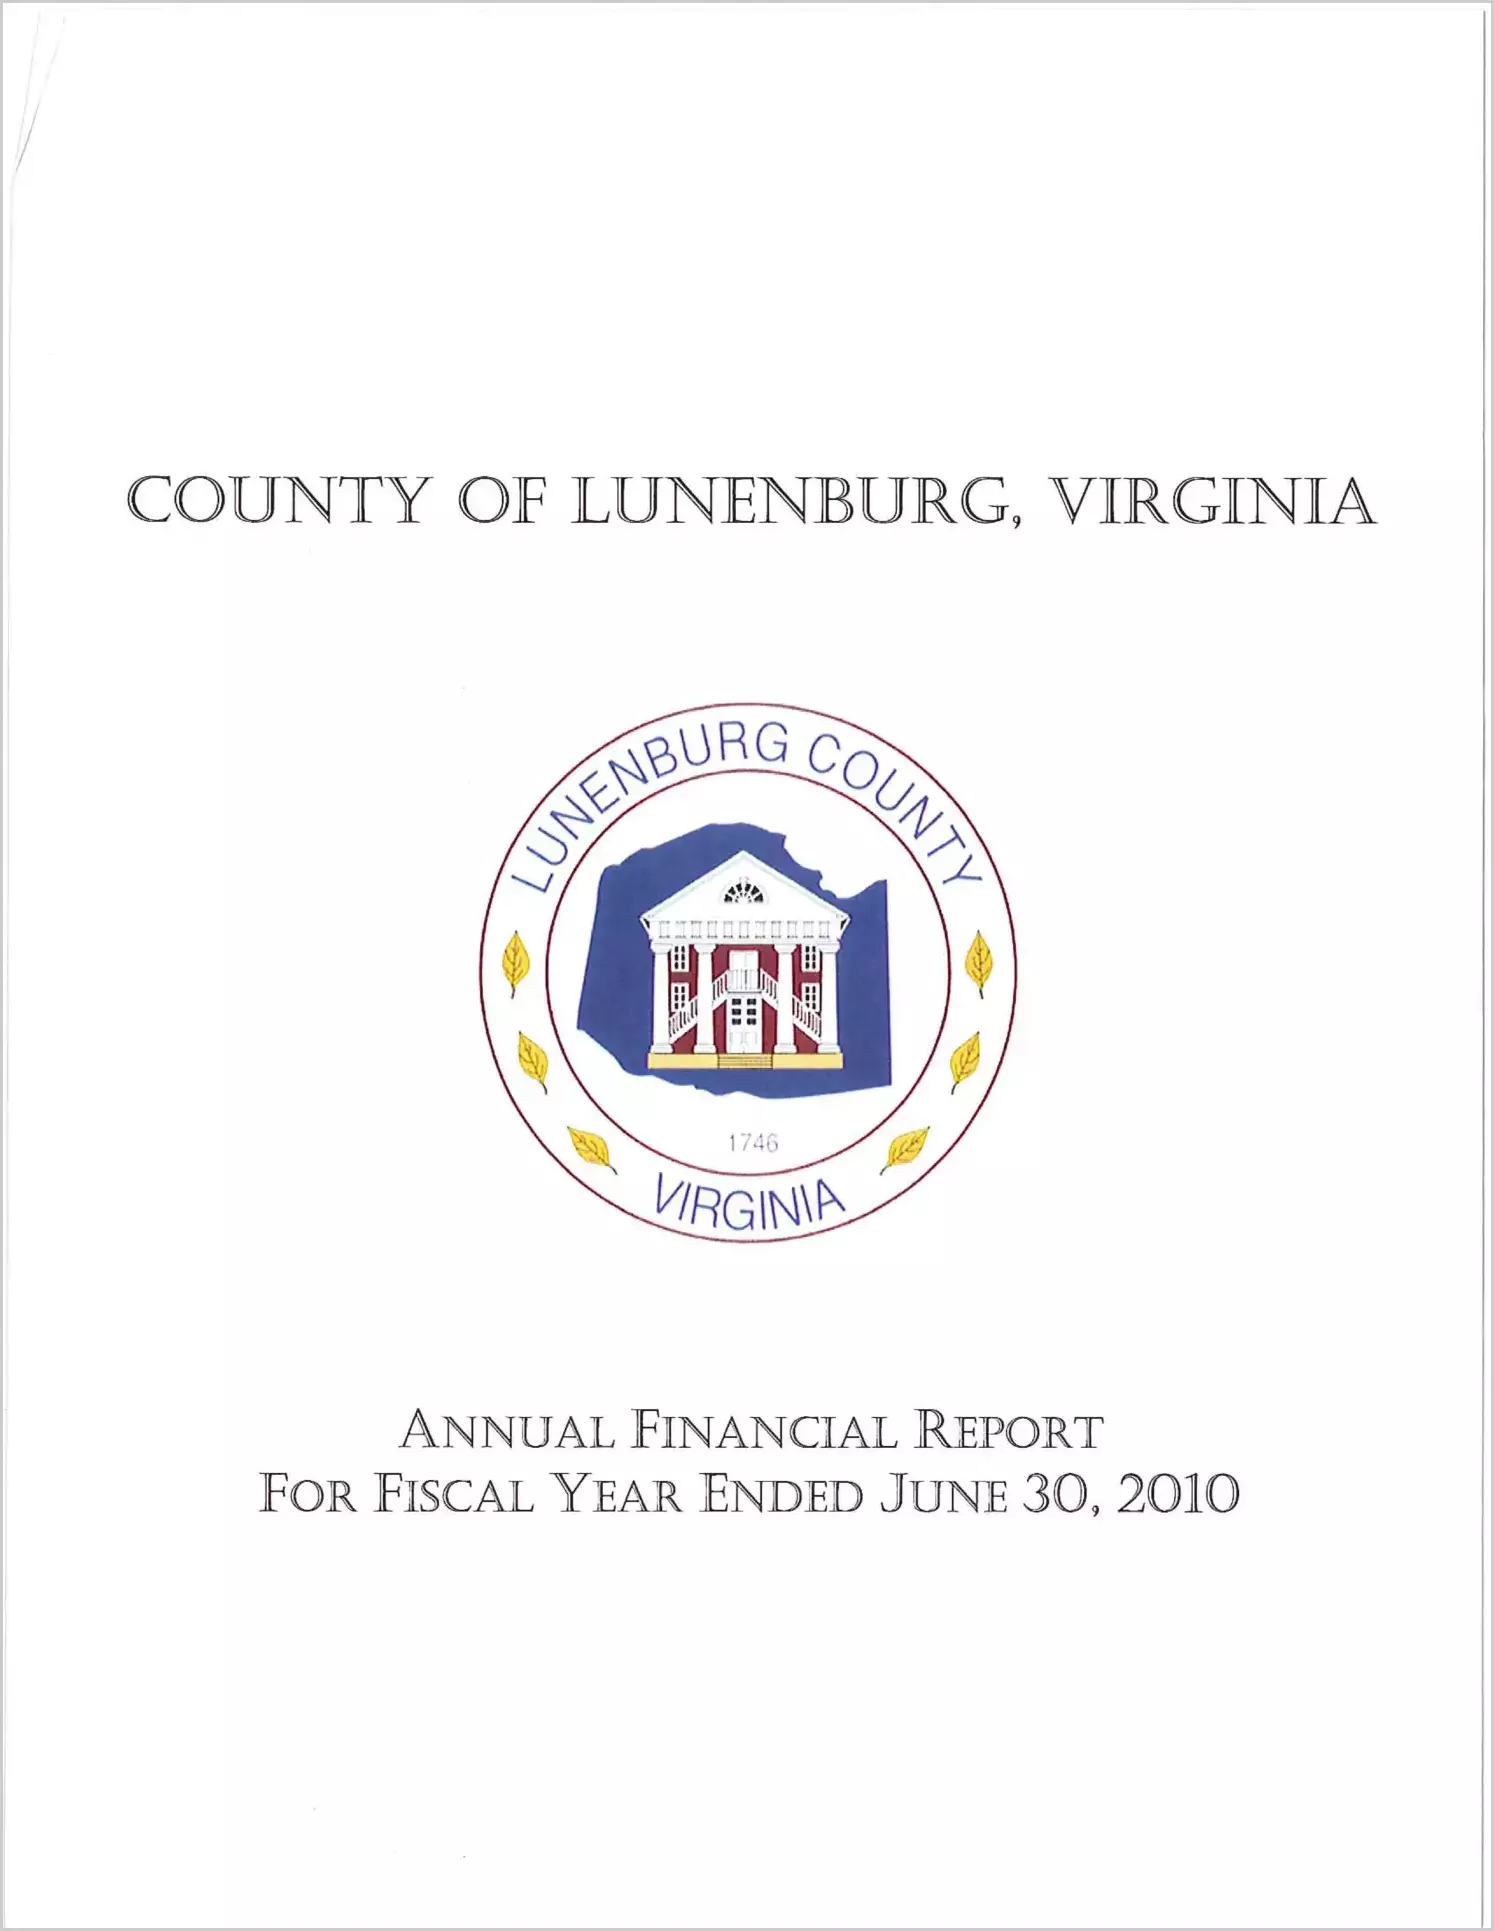 2010 Annual Financial Report for County of Lunenburg